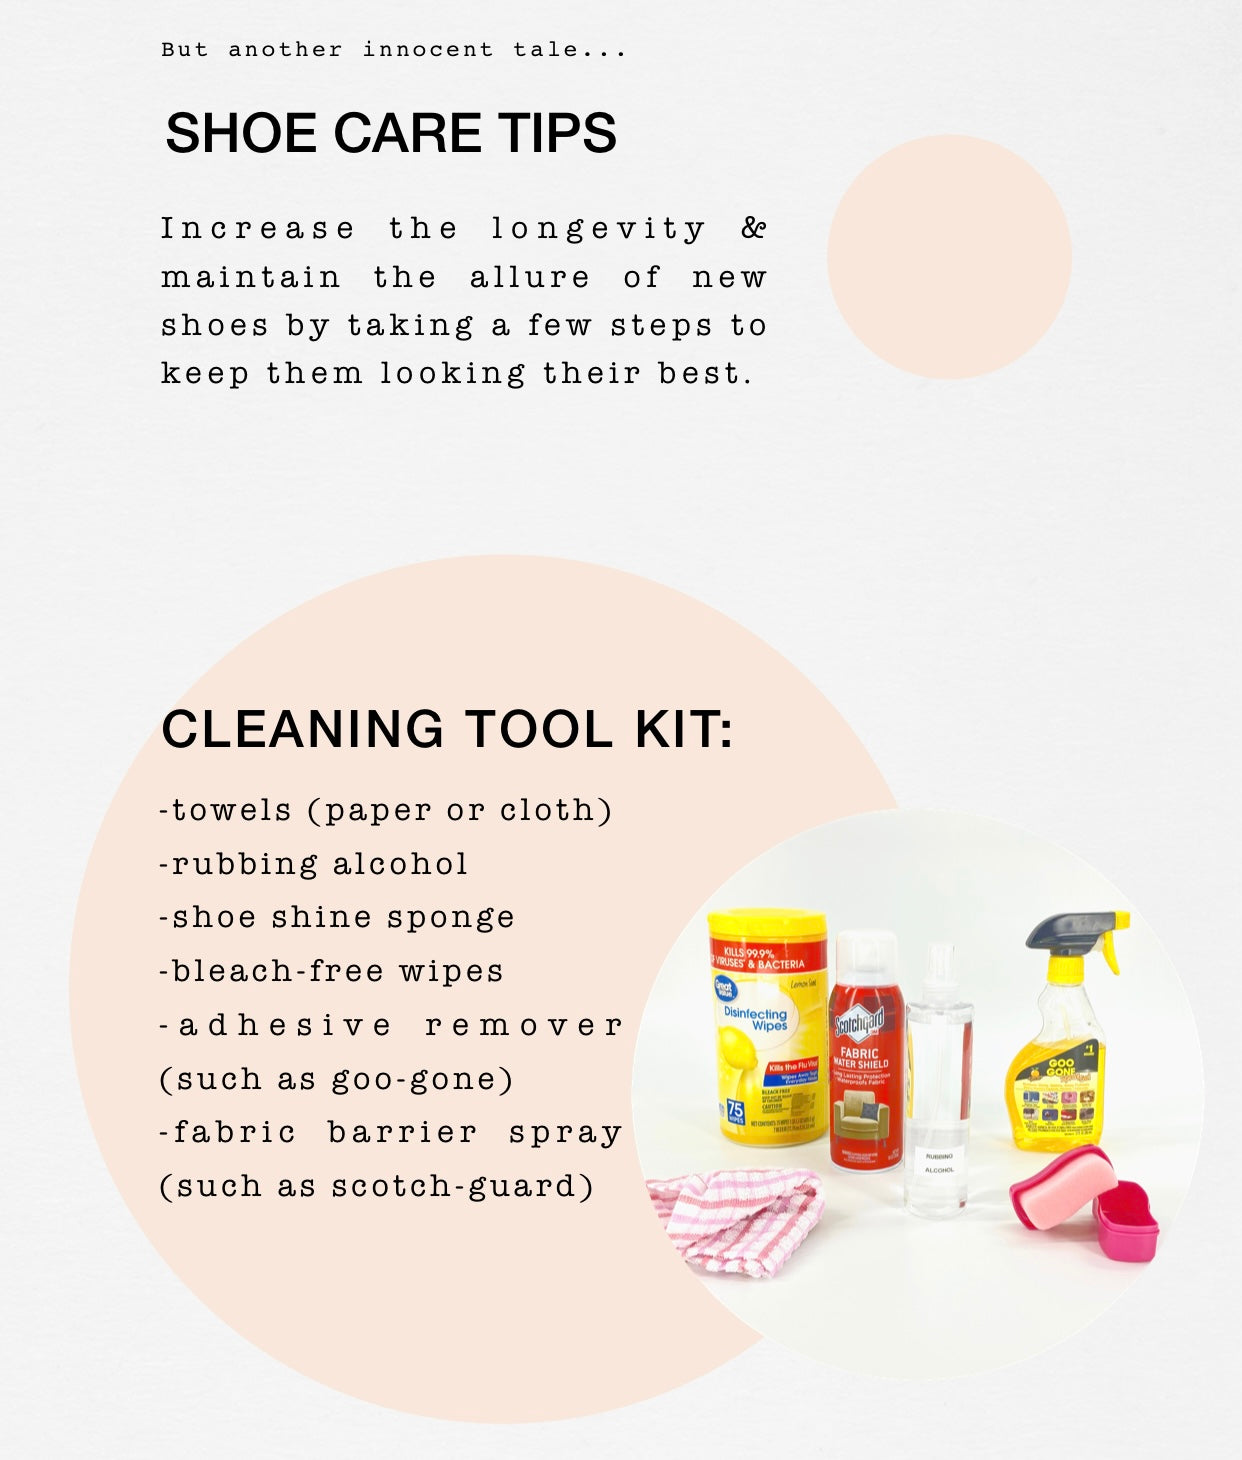 top left corner reads, ‘but another innocent tale…’ below in large font reads, ‘Shoe care tips’ below it in a boxy script, ‘ Increase the longevity & maintain the allure of new shoes by taking a few steps to keep them looking their best.’  -Space- below the description reads ’Cleaning tool kit:’ followed by bullets listing, ‘towels (paper or cloth), rubbing alcohol, shoe shine sponge, bleach-free wipes, adhesive remover (such as goo-gone), fabric barrier spray (such as scotch-guard)’ Next to the list is a photo, cropped as a circle. There are six tools in the photo, from left to right, in the lower left corner there’s a striped cloth rag, next to a canister of bleach-free disinfecting wipes, to the right of the canister is a bottle of scotchguard fabric barrier spray, next to this is a clear spray bottle labeled ‘rubbing alcohol’. There is a bottle of goo-gone in the upper right hand side & below it is a small hot pink shoe shine sponge. 